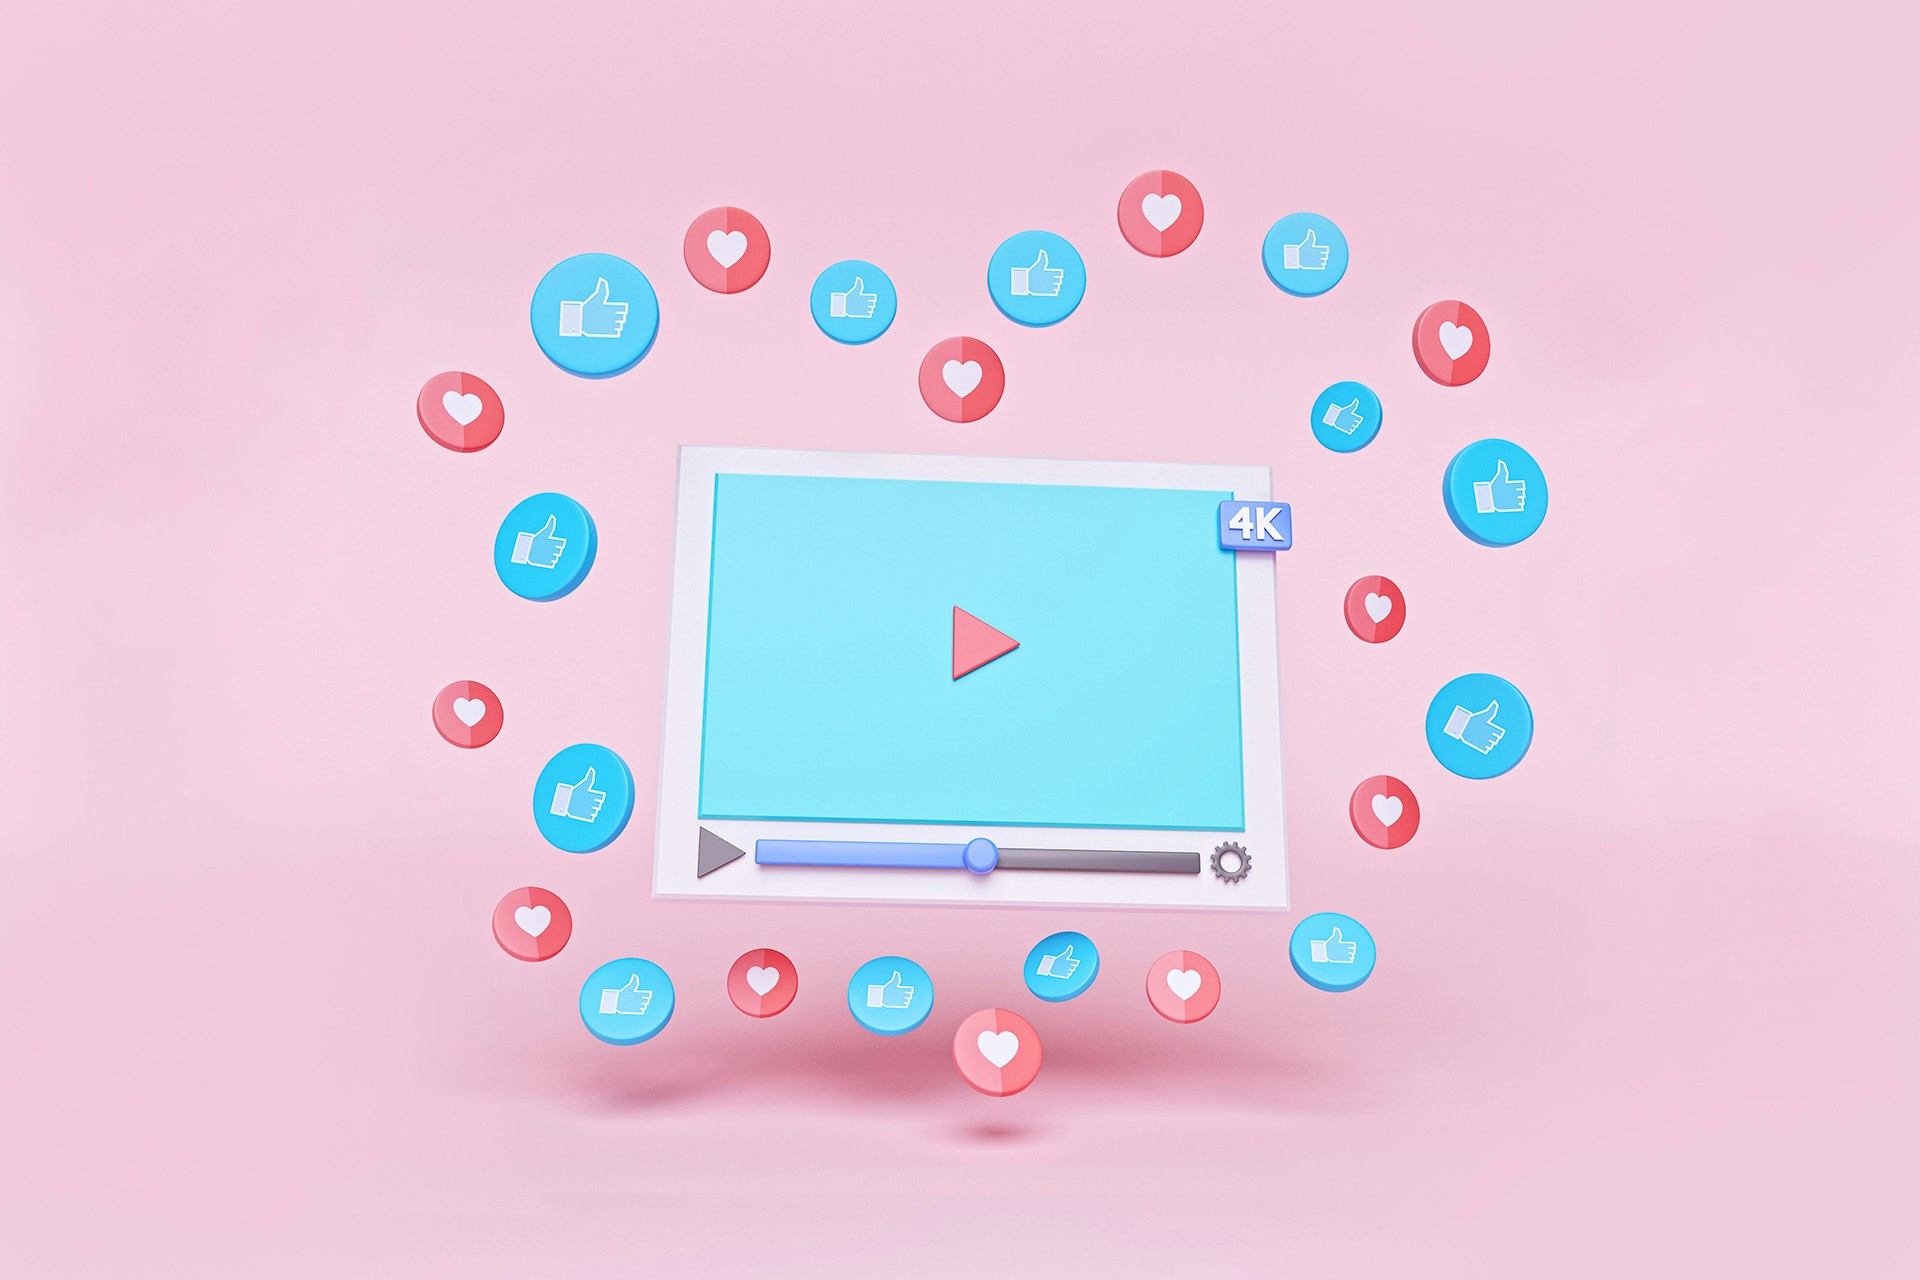 An icon of a YouTube video player with icons of hearts and "Likes" floating around the video in a heart-like shape. This is the type of engagement most marketers dream their YouTube video marketing strategy will generate.